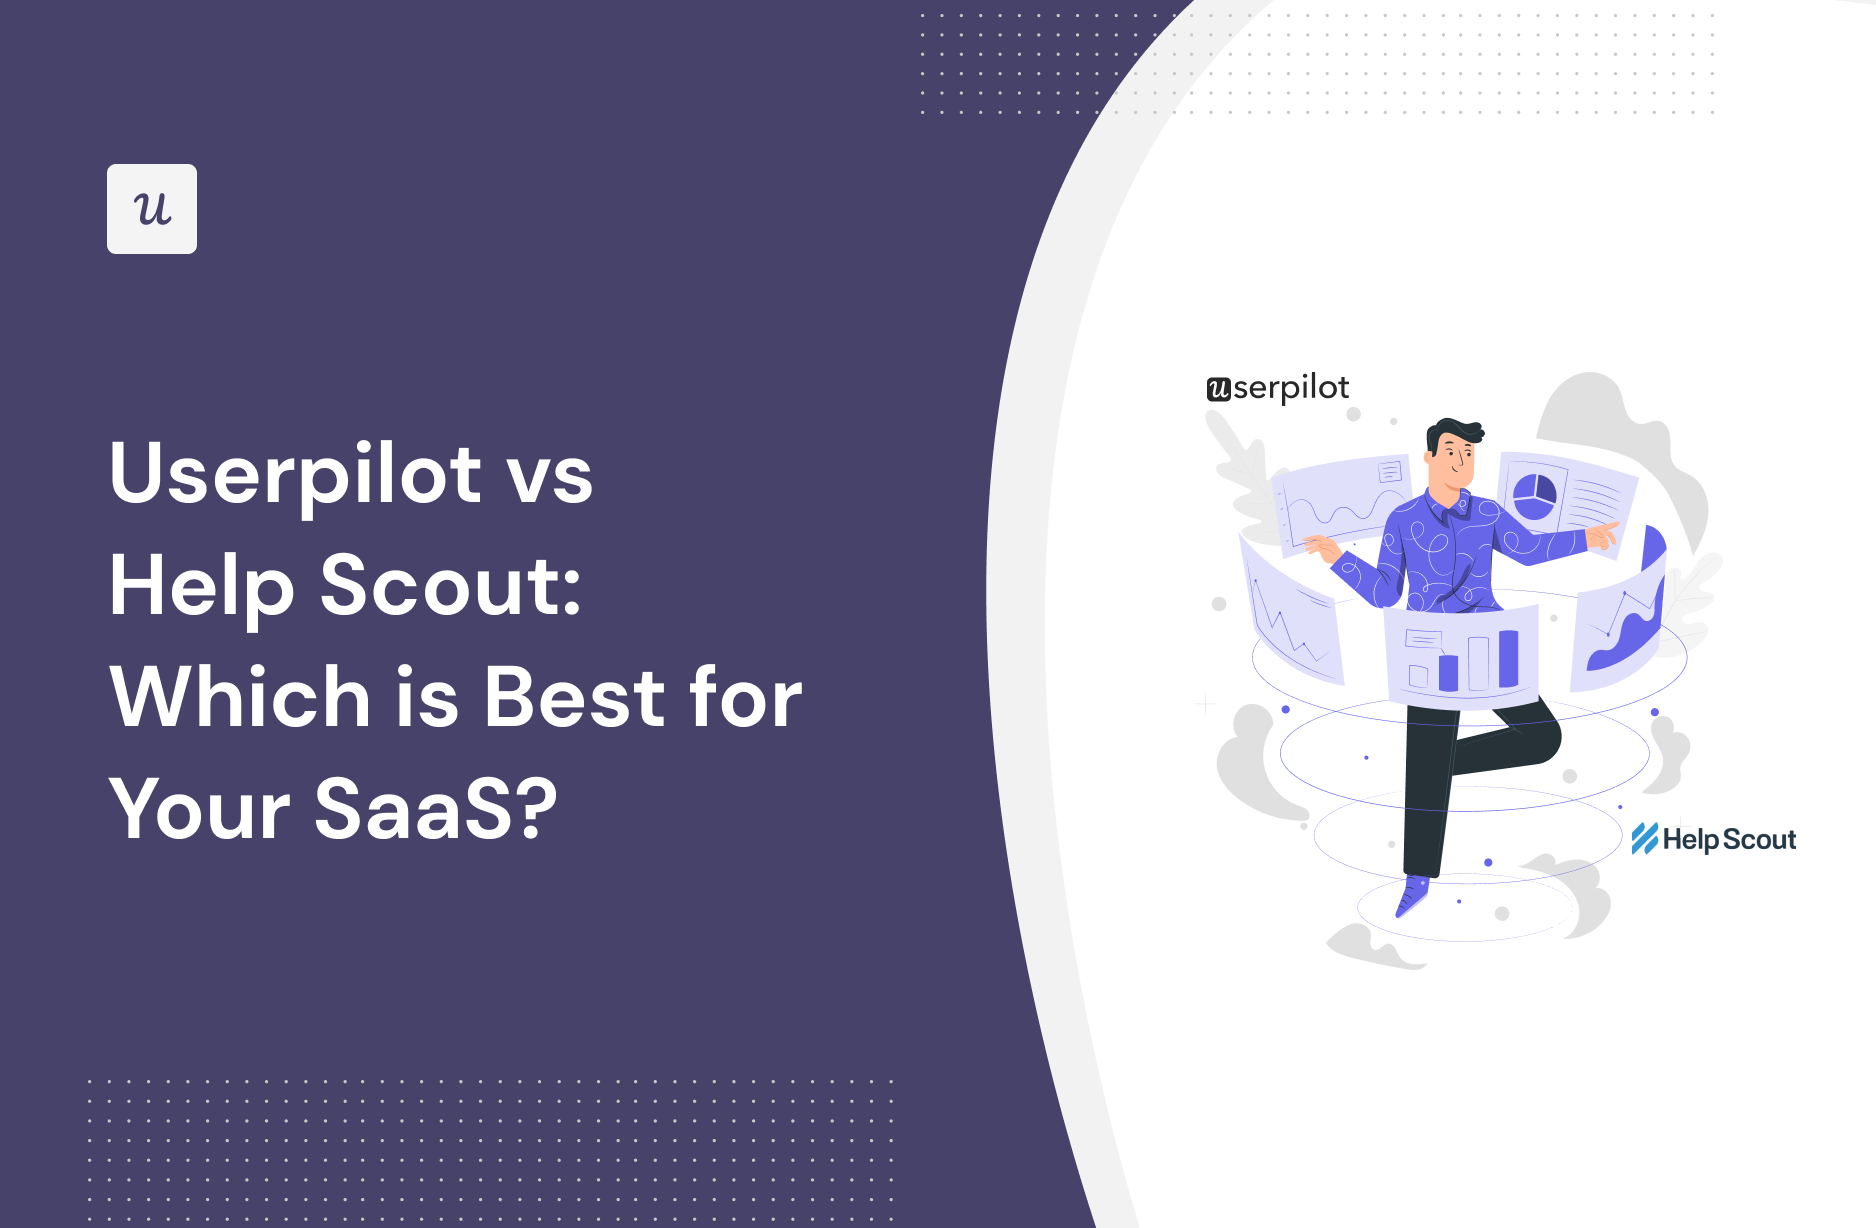 Userpilot vs Help Scout: Which Is Best for Your SaaS?